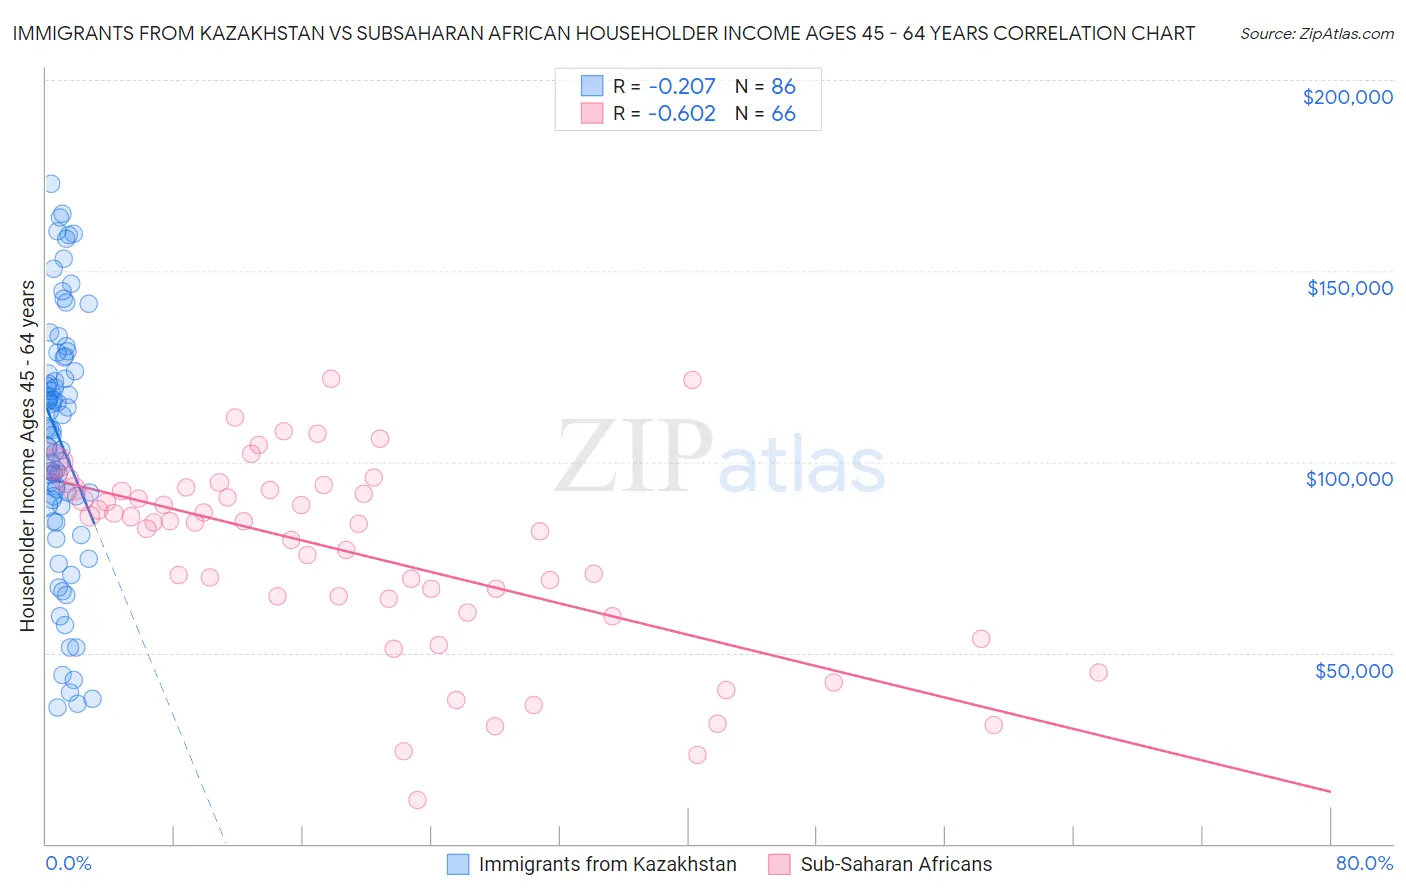 Immigrants from Kazakhstan vs Subsaharan African Householder Income Ages 45 - 64 years